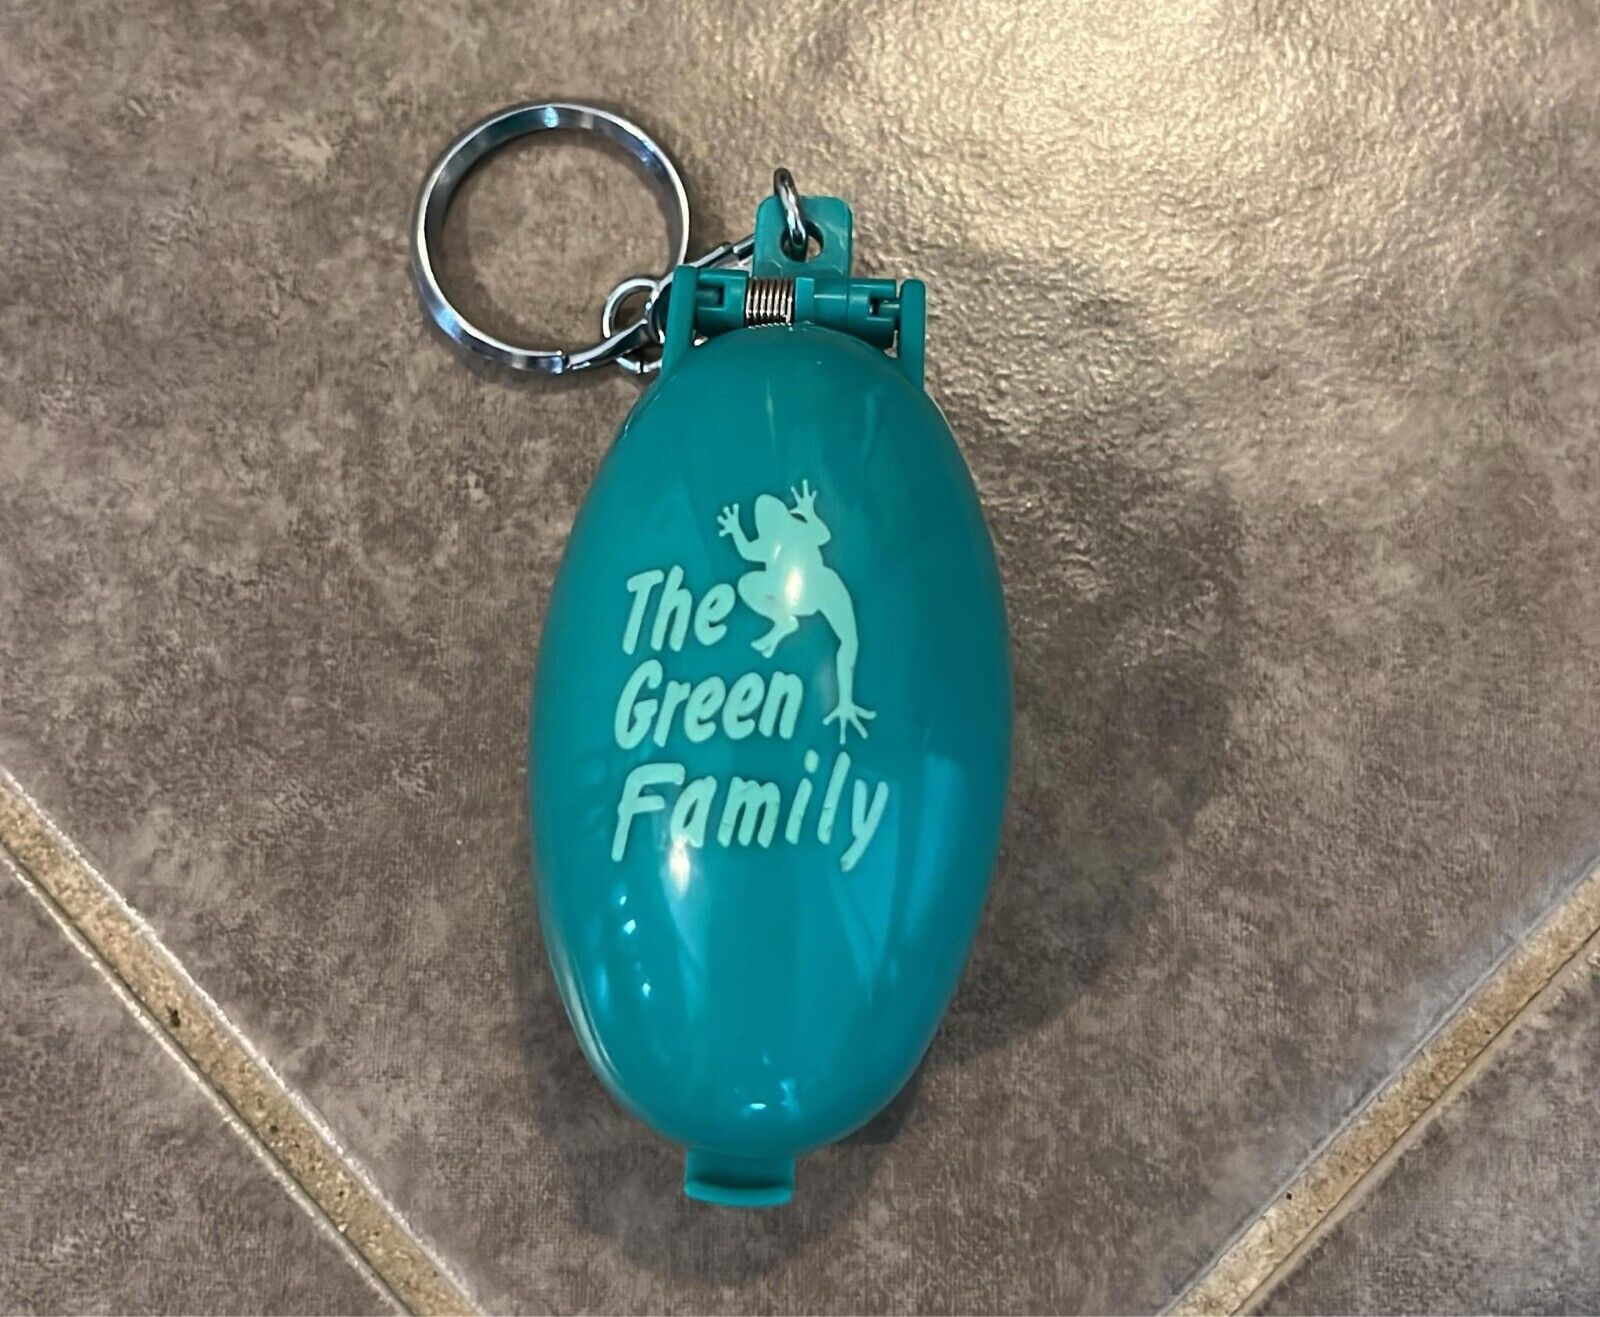 The Green Family Frogs Pocket Critters 1993 Takara Vintage Keychain Not Working